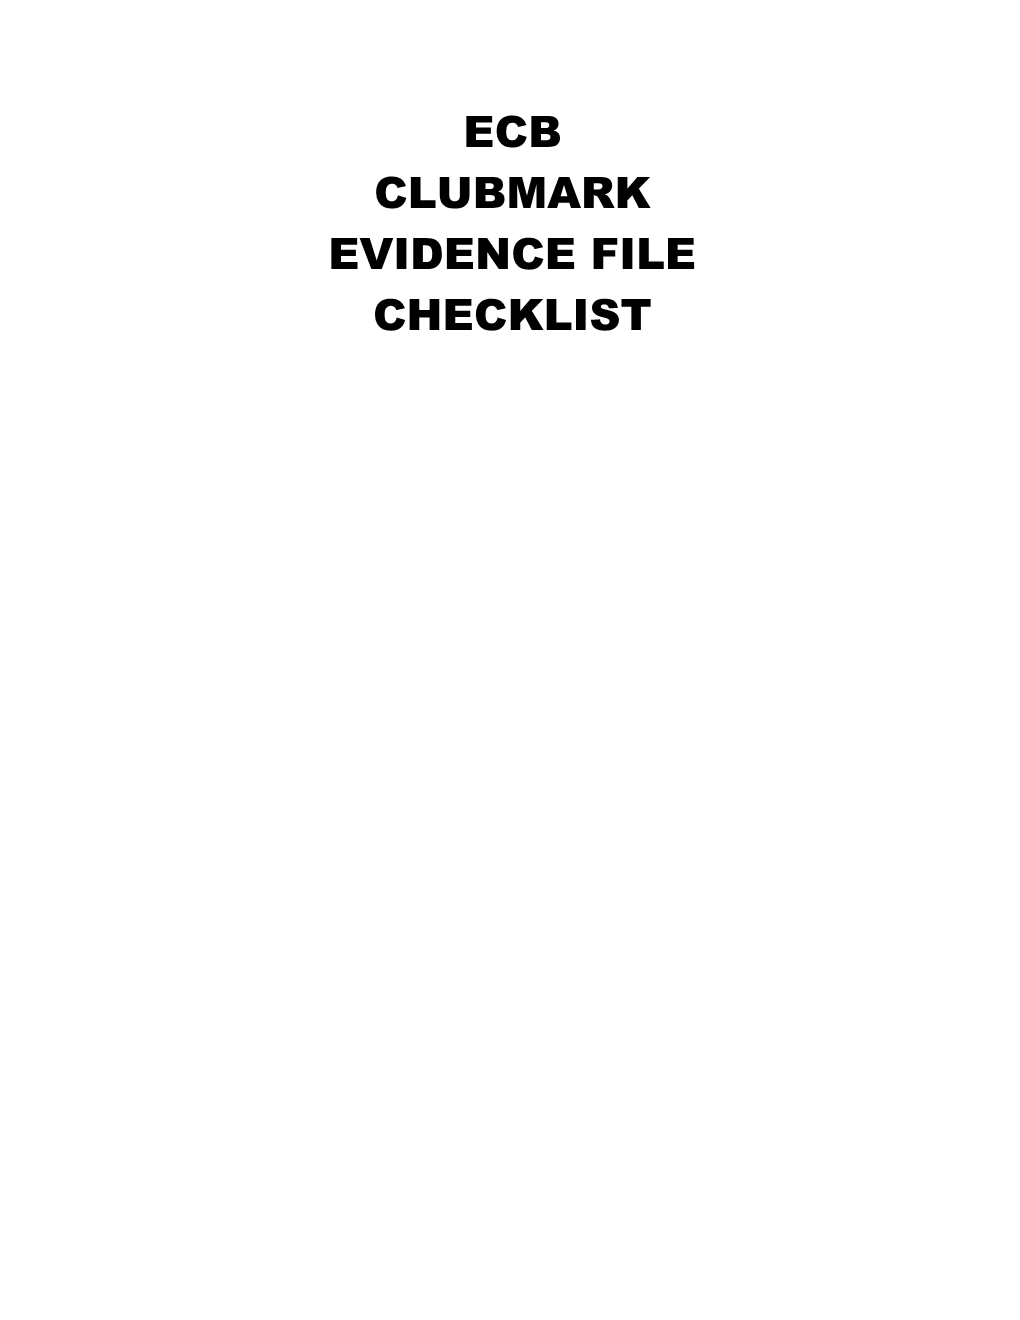 ECB Clubmark Evidence File Checklist Club Details (To Be Completed by the Club)